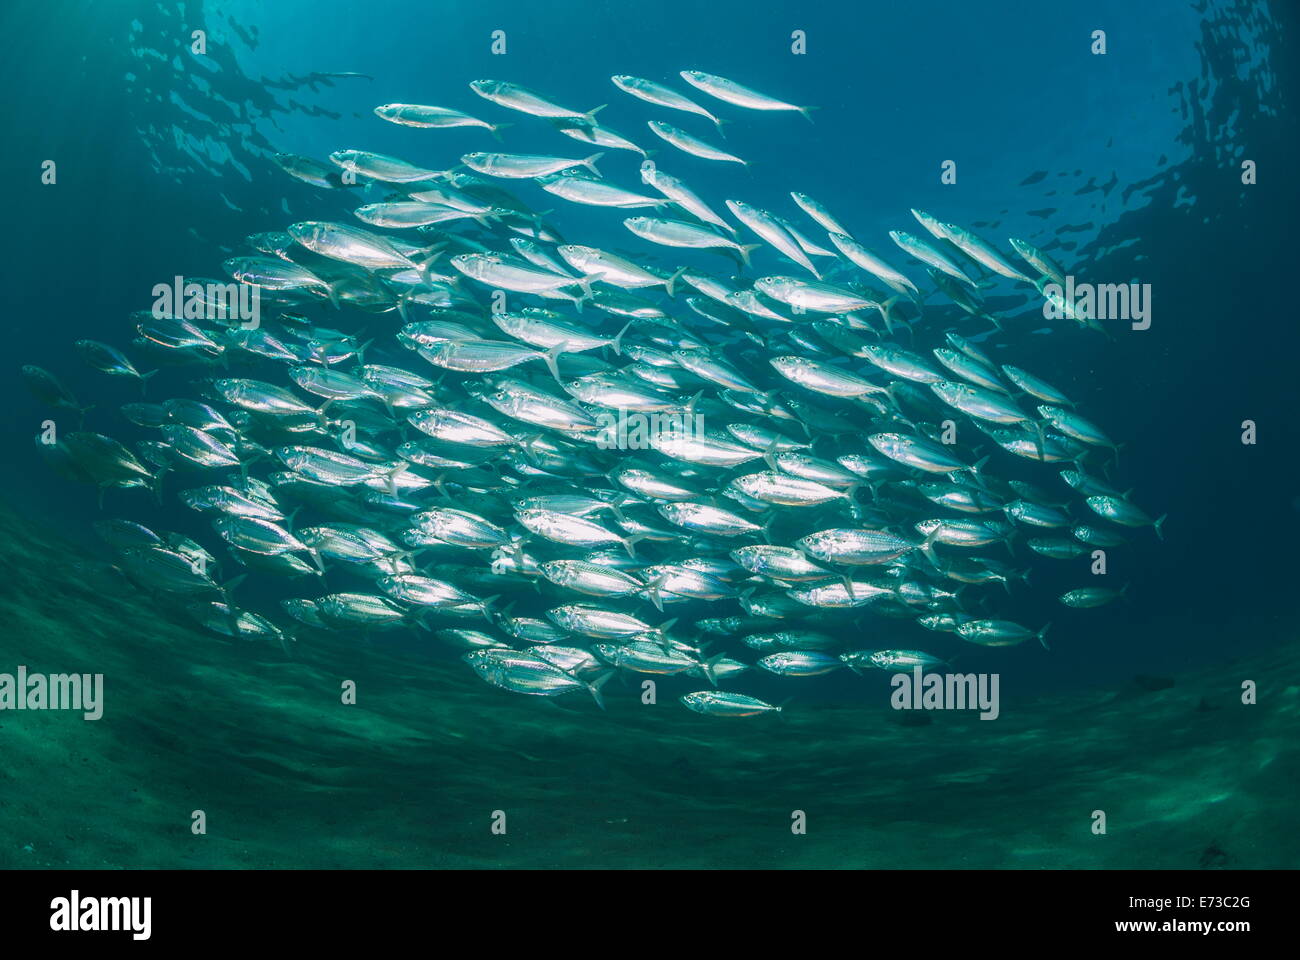 Small school of Indian mackerel in shallow water, Naama Bay, Sharm El Sheikh, Red Sea, Egypt, North Africa Stock Photo